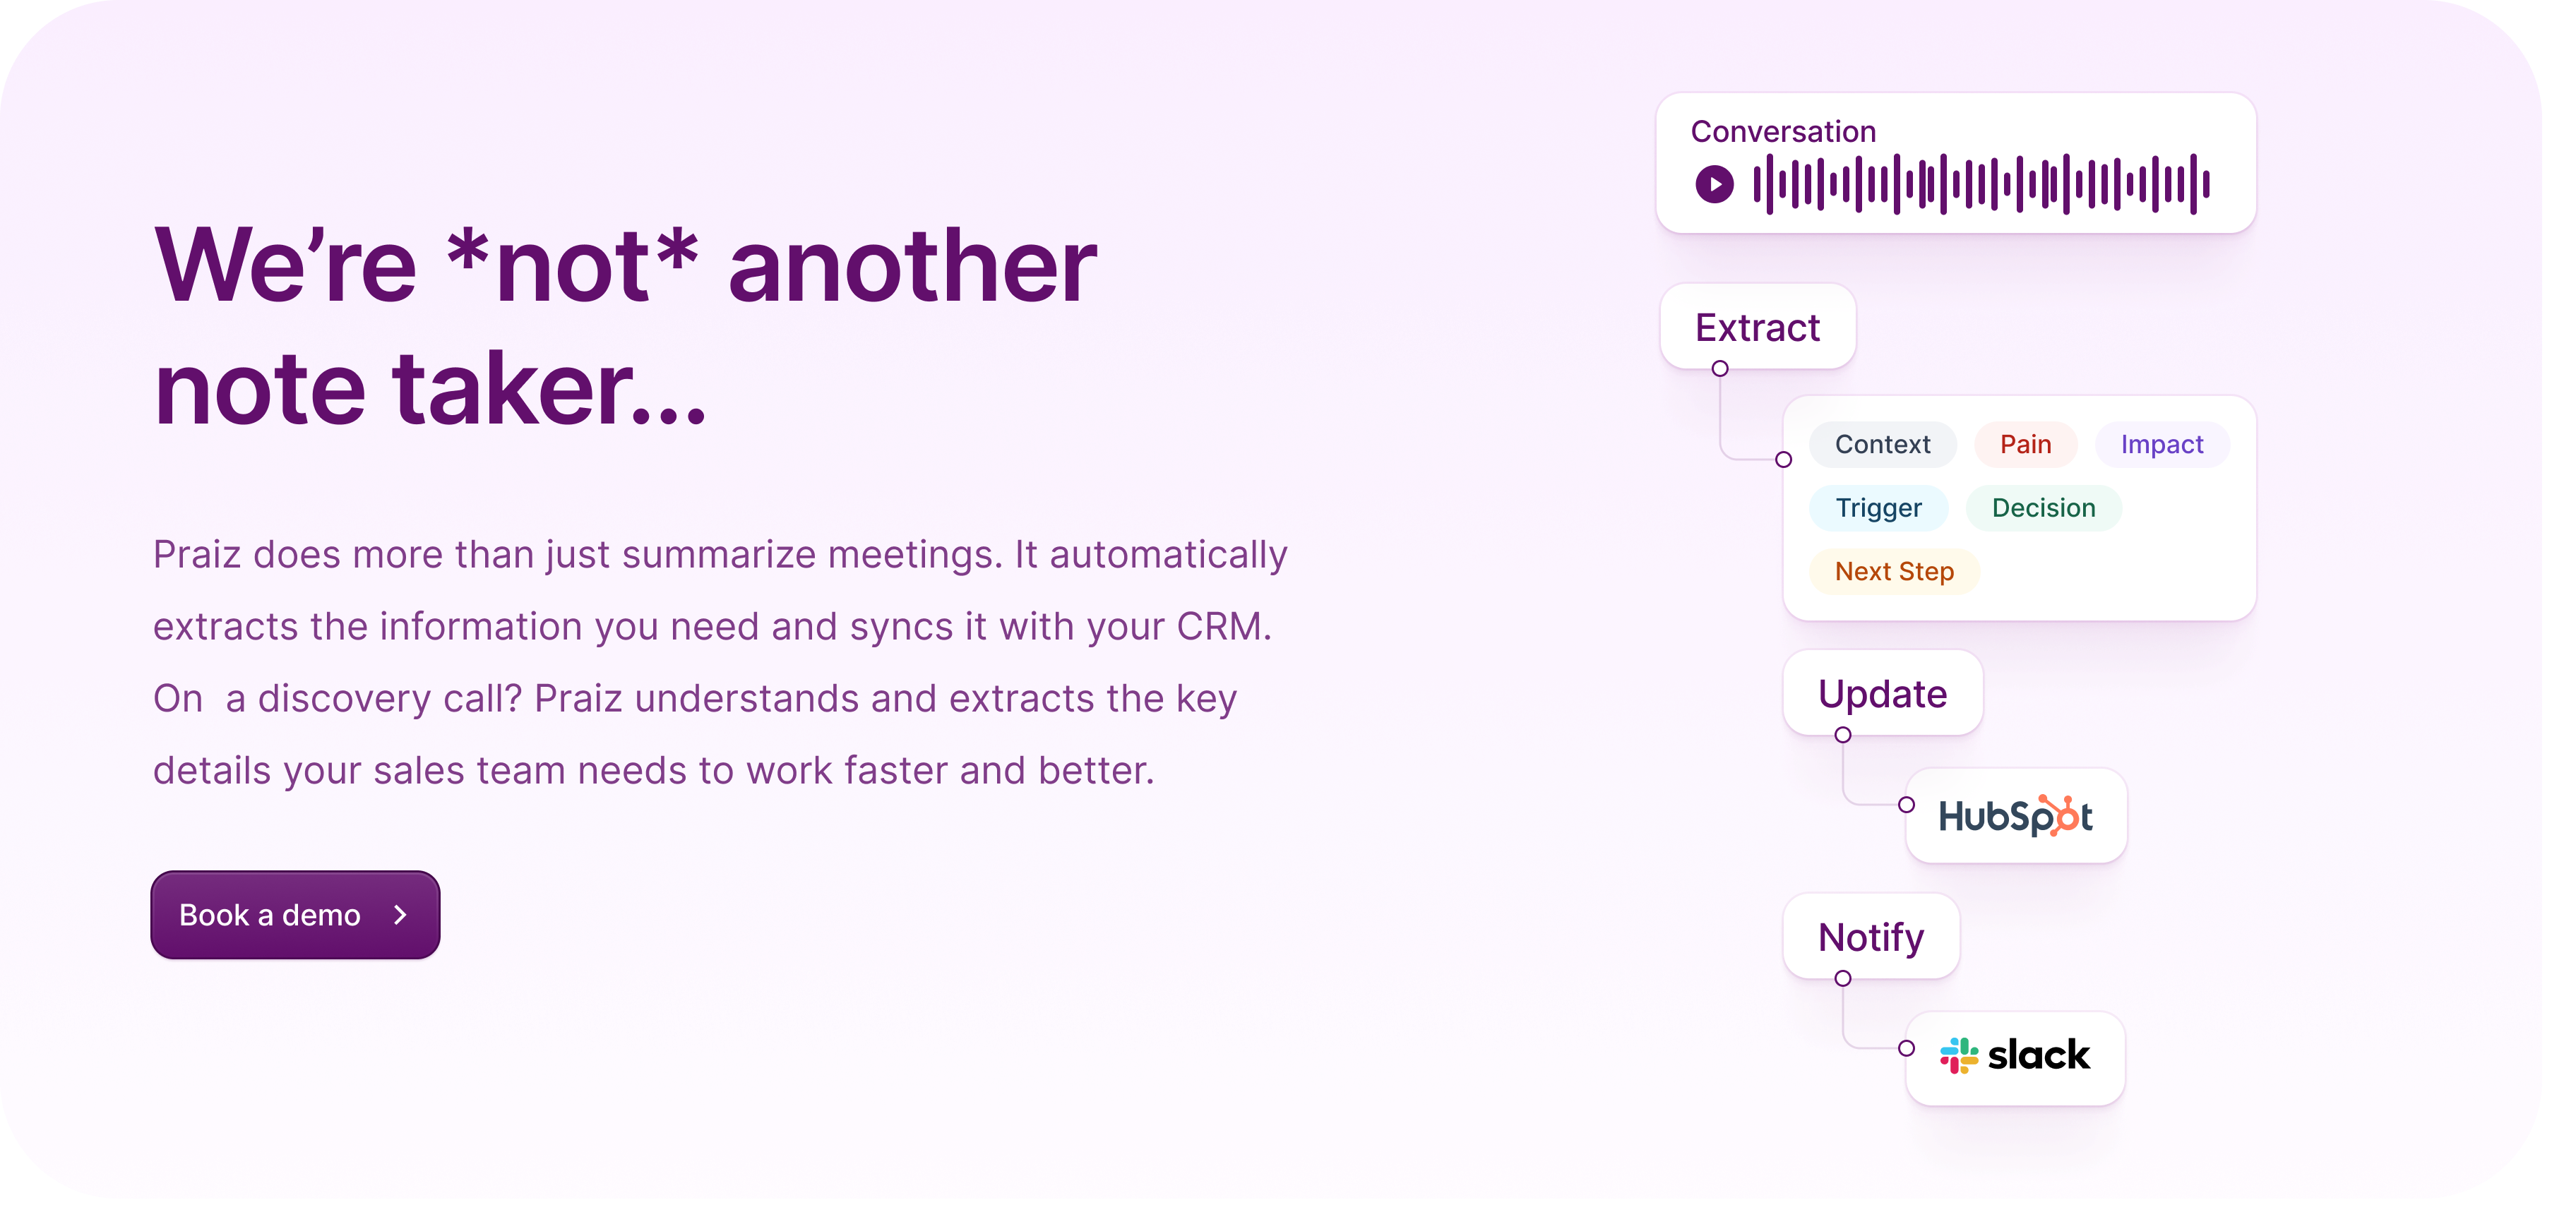 Praiz does more than just summarize all your meetings. Using the best transcription available and a tailor-made Gen-AI extraction technology, we automatically load all the information you need into your CRM or ATS.